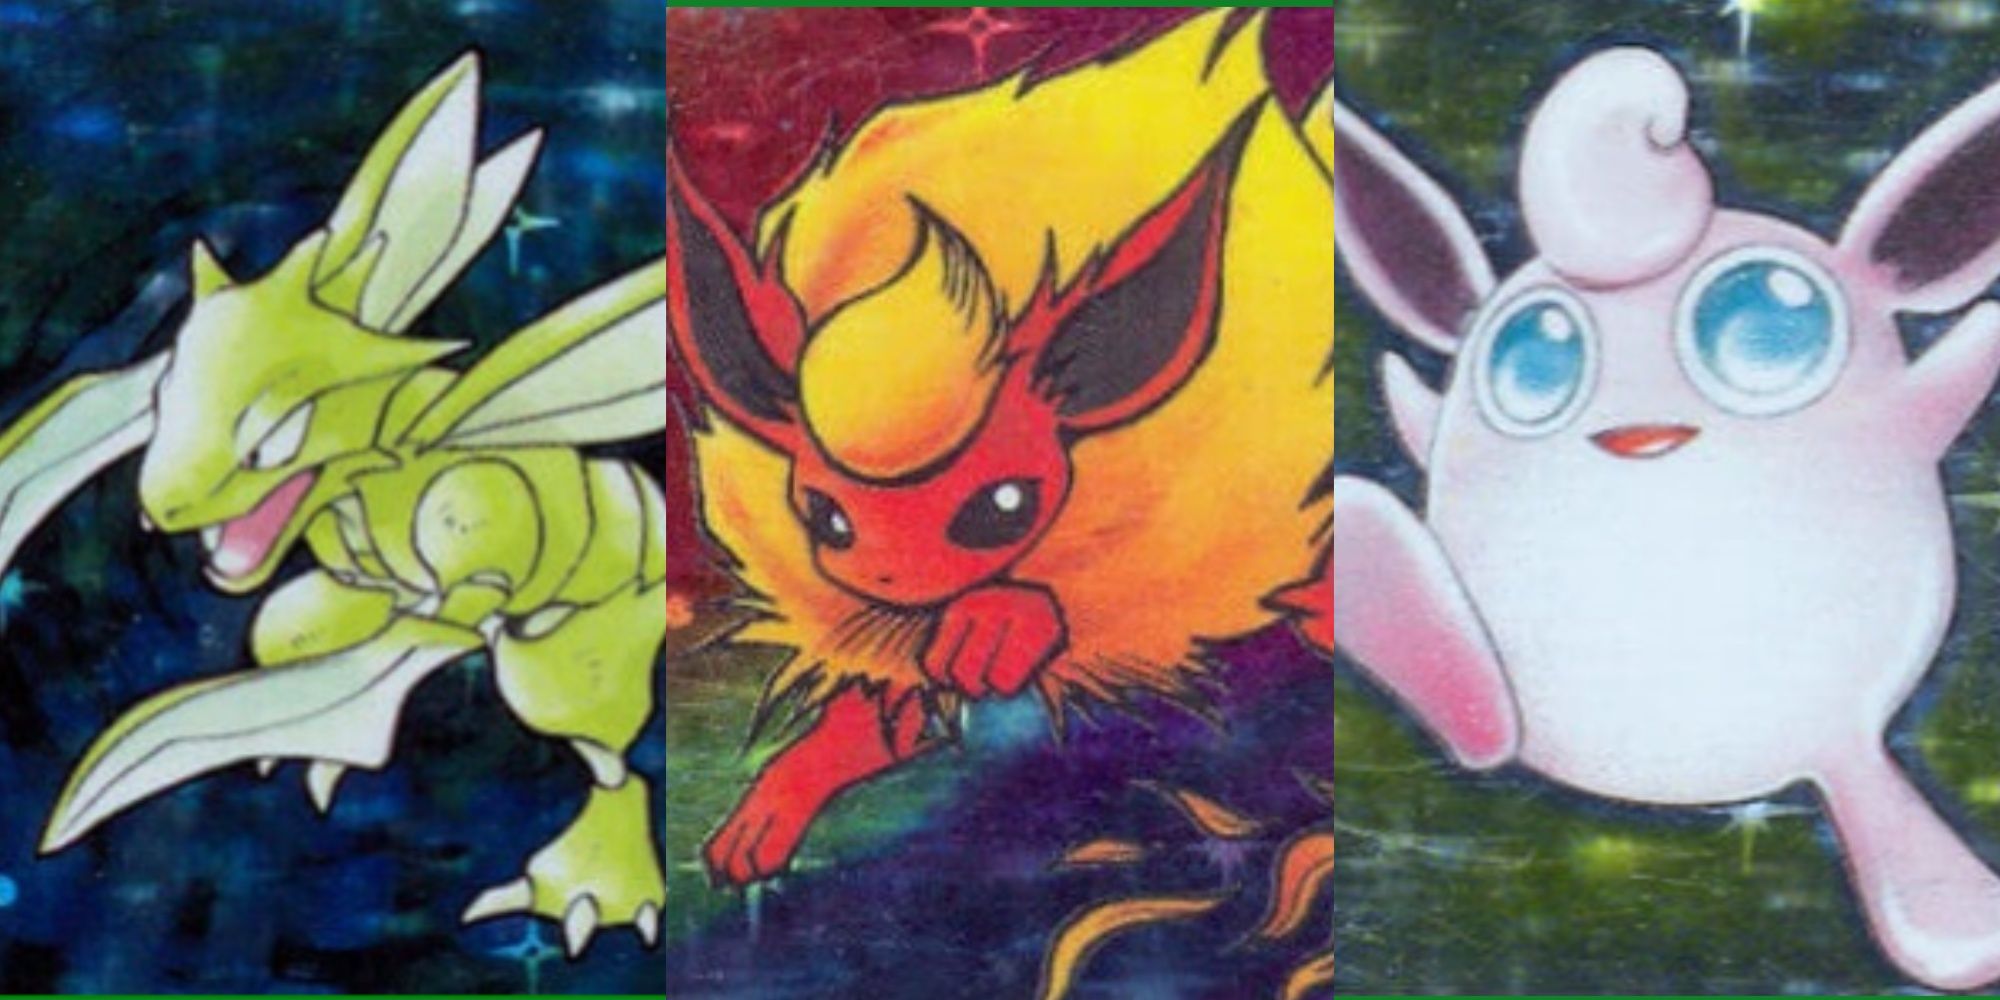 Scyther, Flareon and Wigglytuff card art from Pokemon TCG Jungle